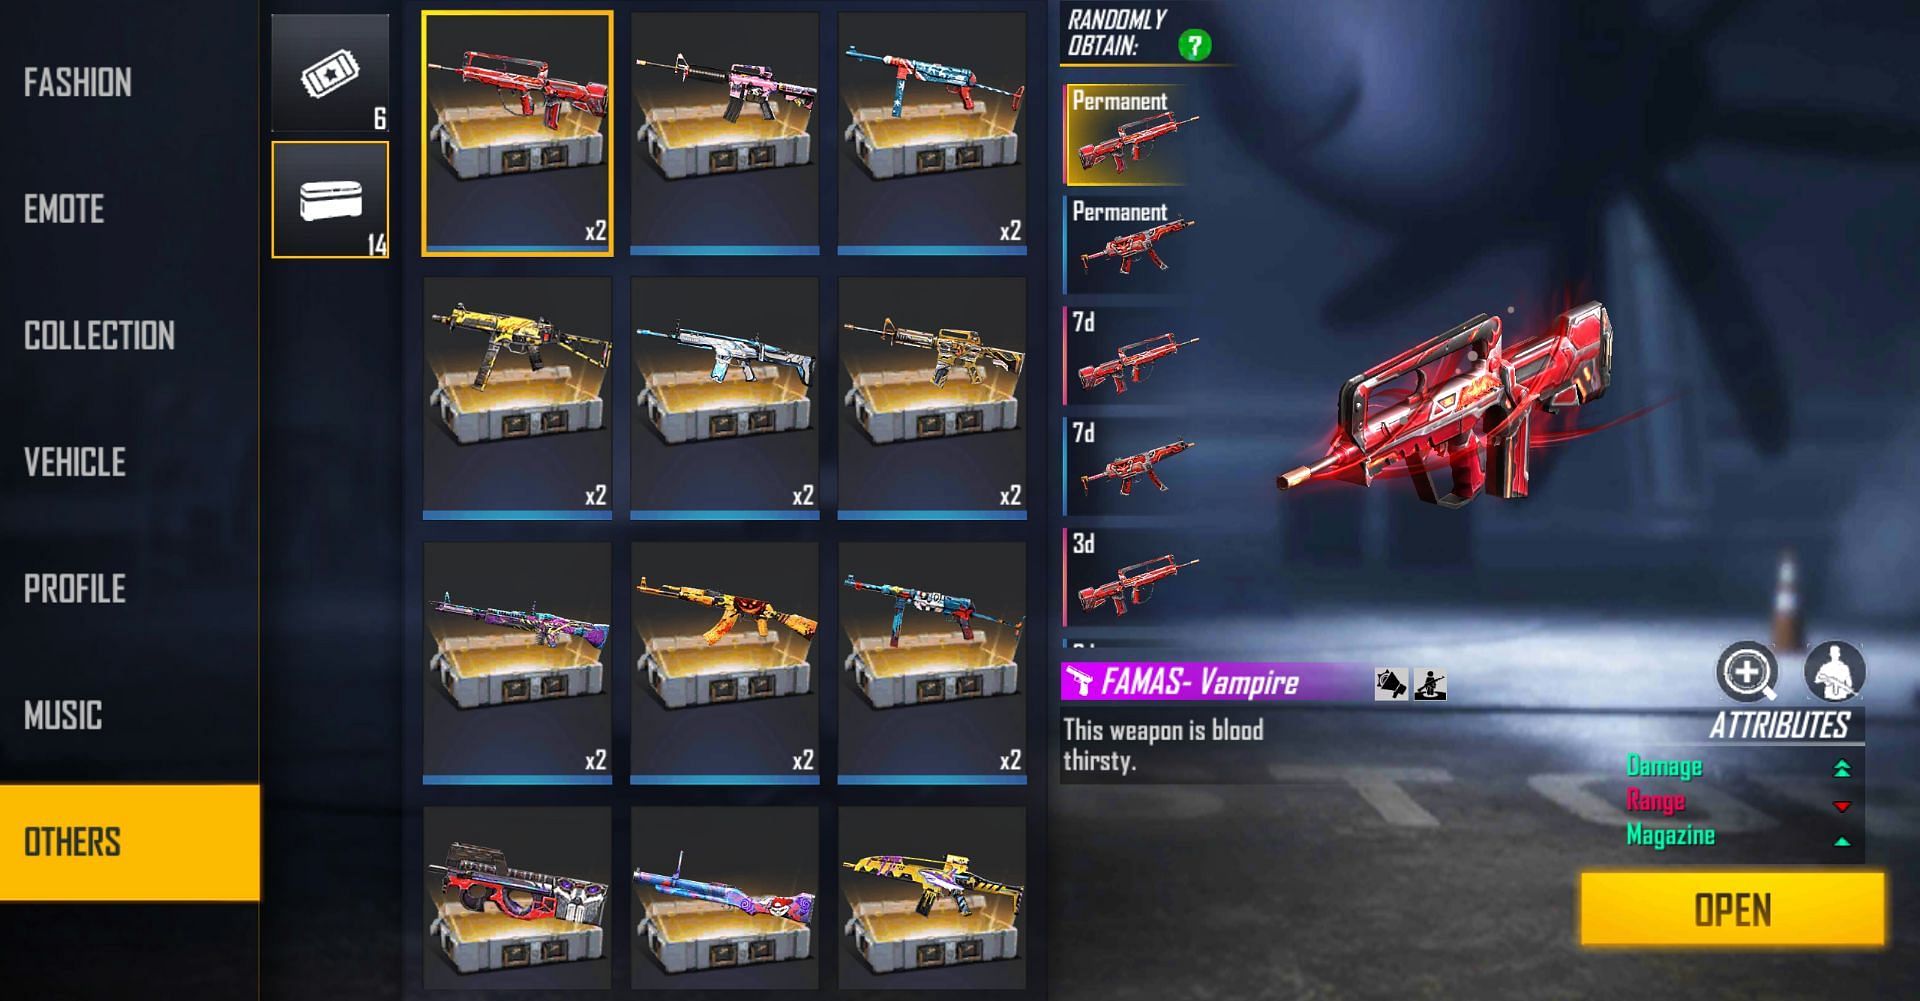 2x FAMAS Vampire Weapon Loot Crate is the reward for new Free Fire redeem code (Image via Garena)